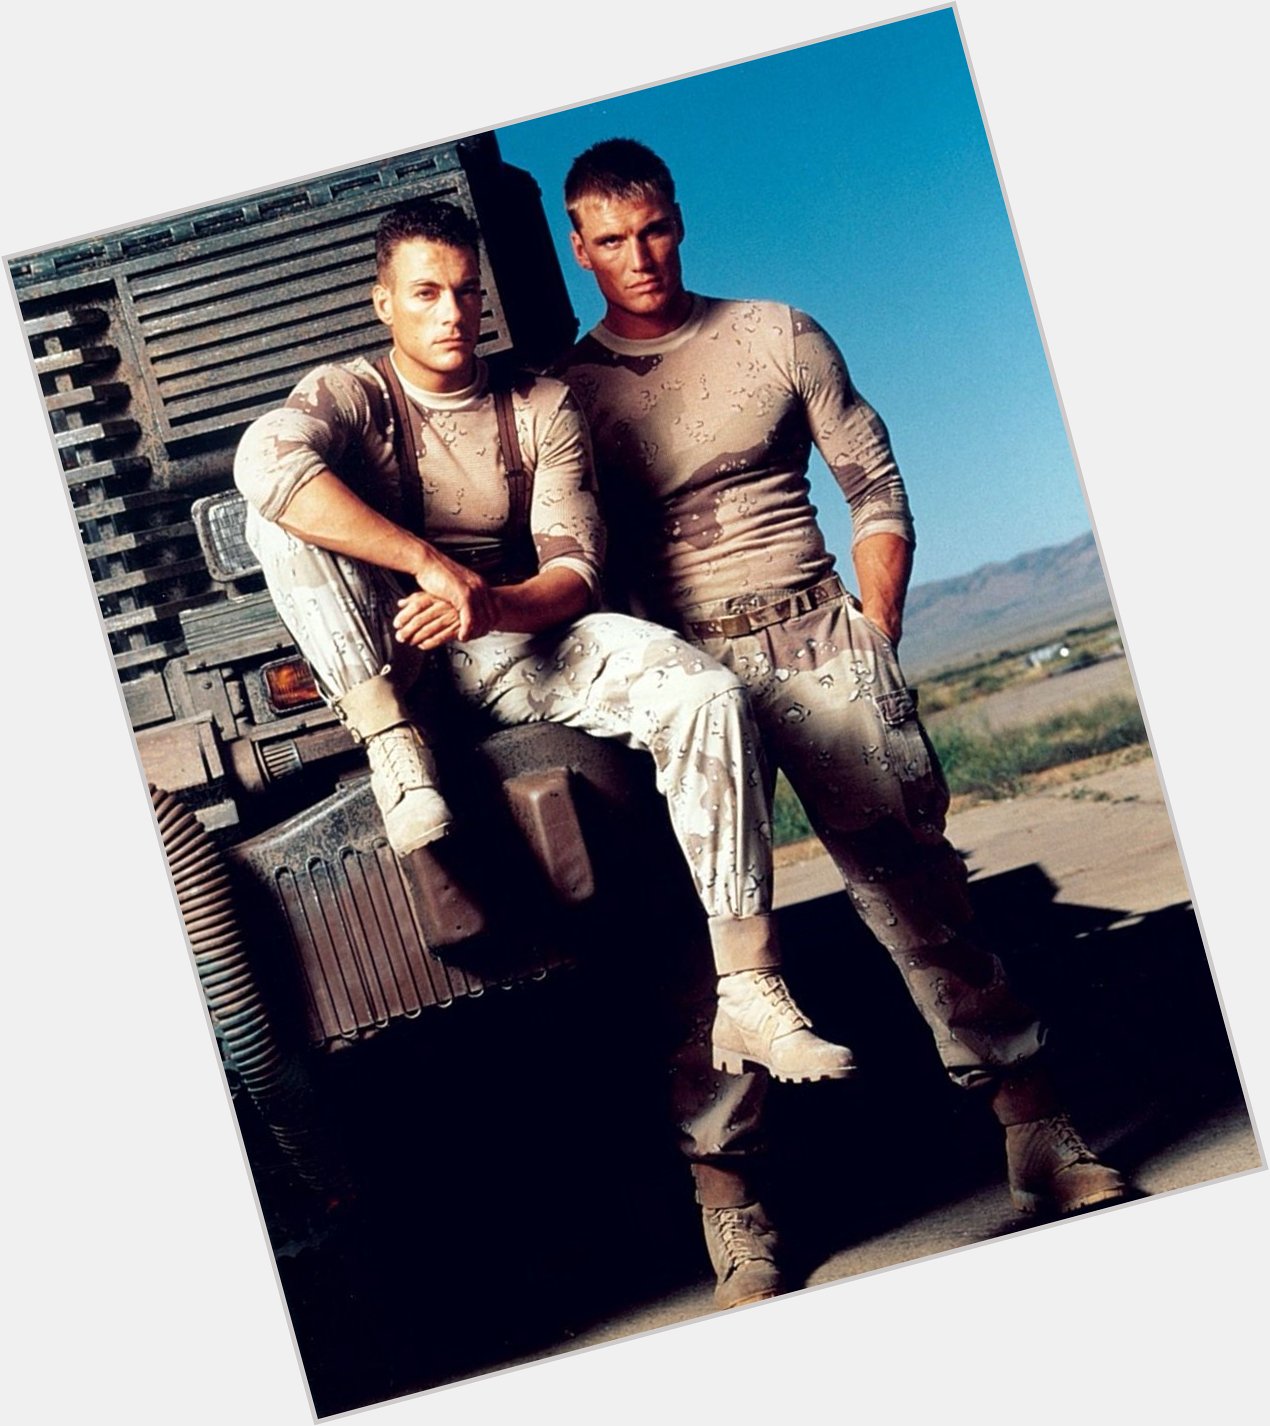 Happy Birthday to Jean-Claude Van Damme! 

Pictured with his Universal Soldier co-star Dolph Lundgren in 1992: 